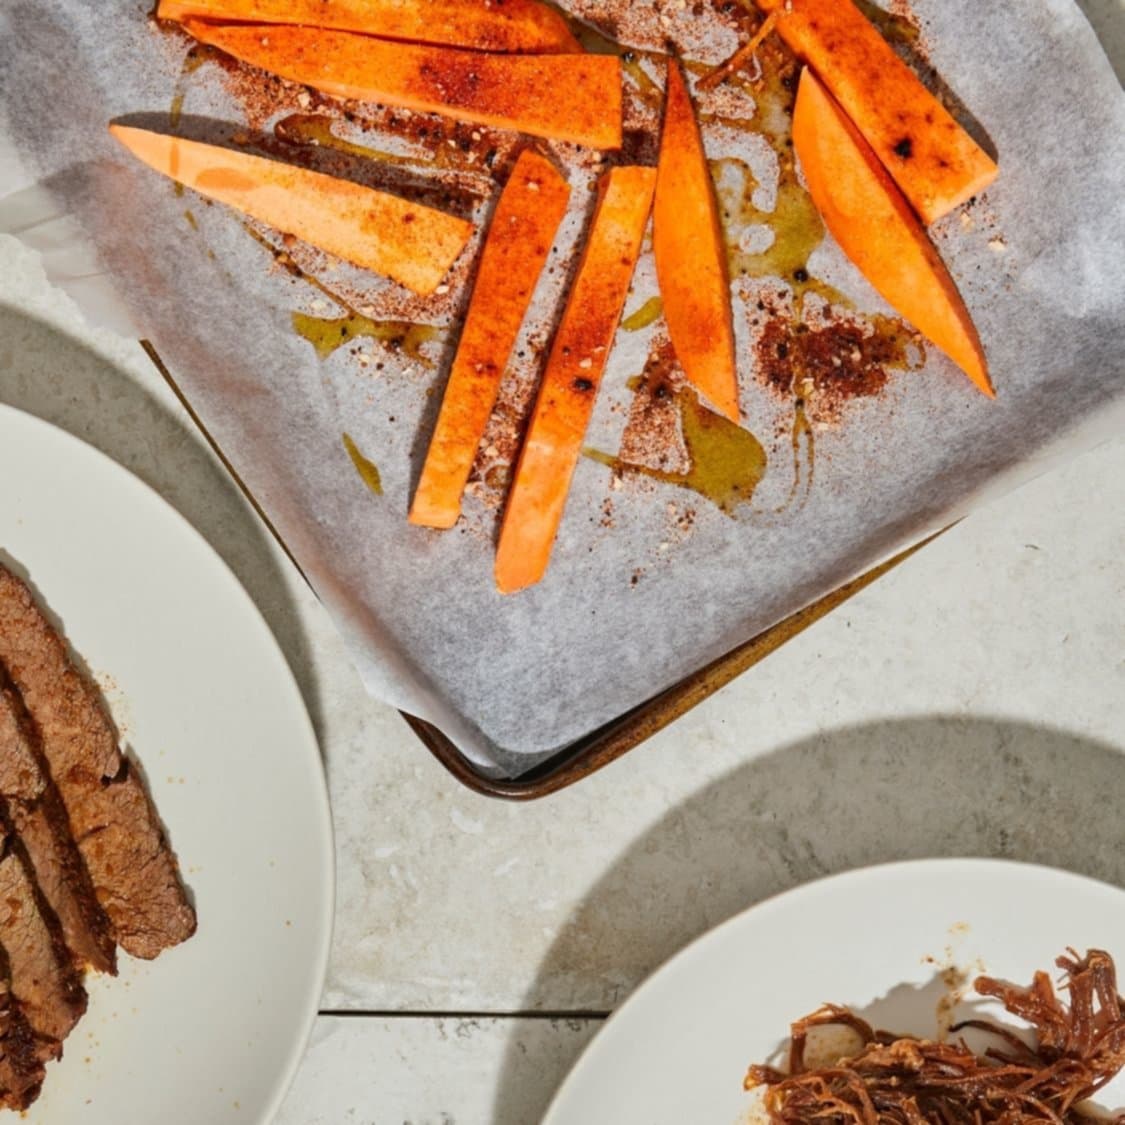 https://fleishigs.com/images/mobile-app/recipes/1864-list-coffee-rubbed-roasted-sweet-potatoes.jpg